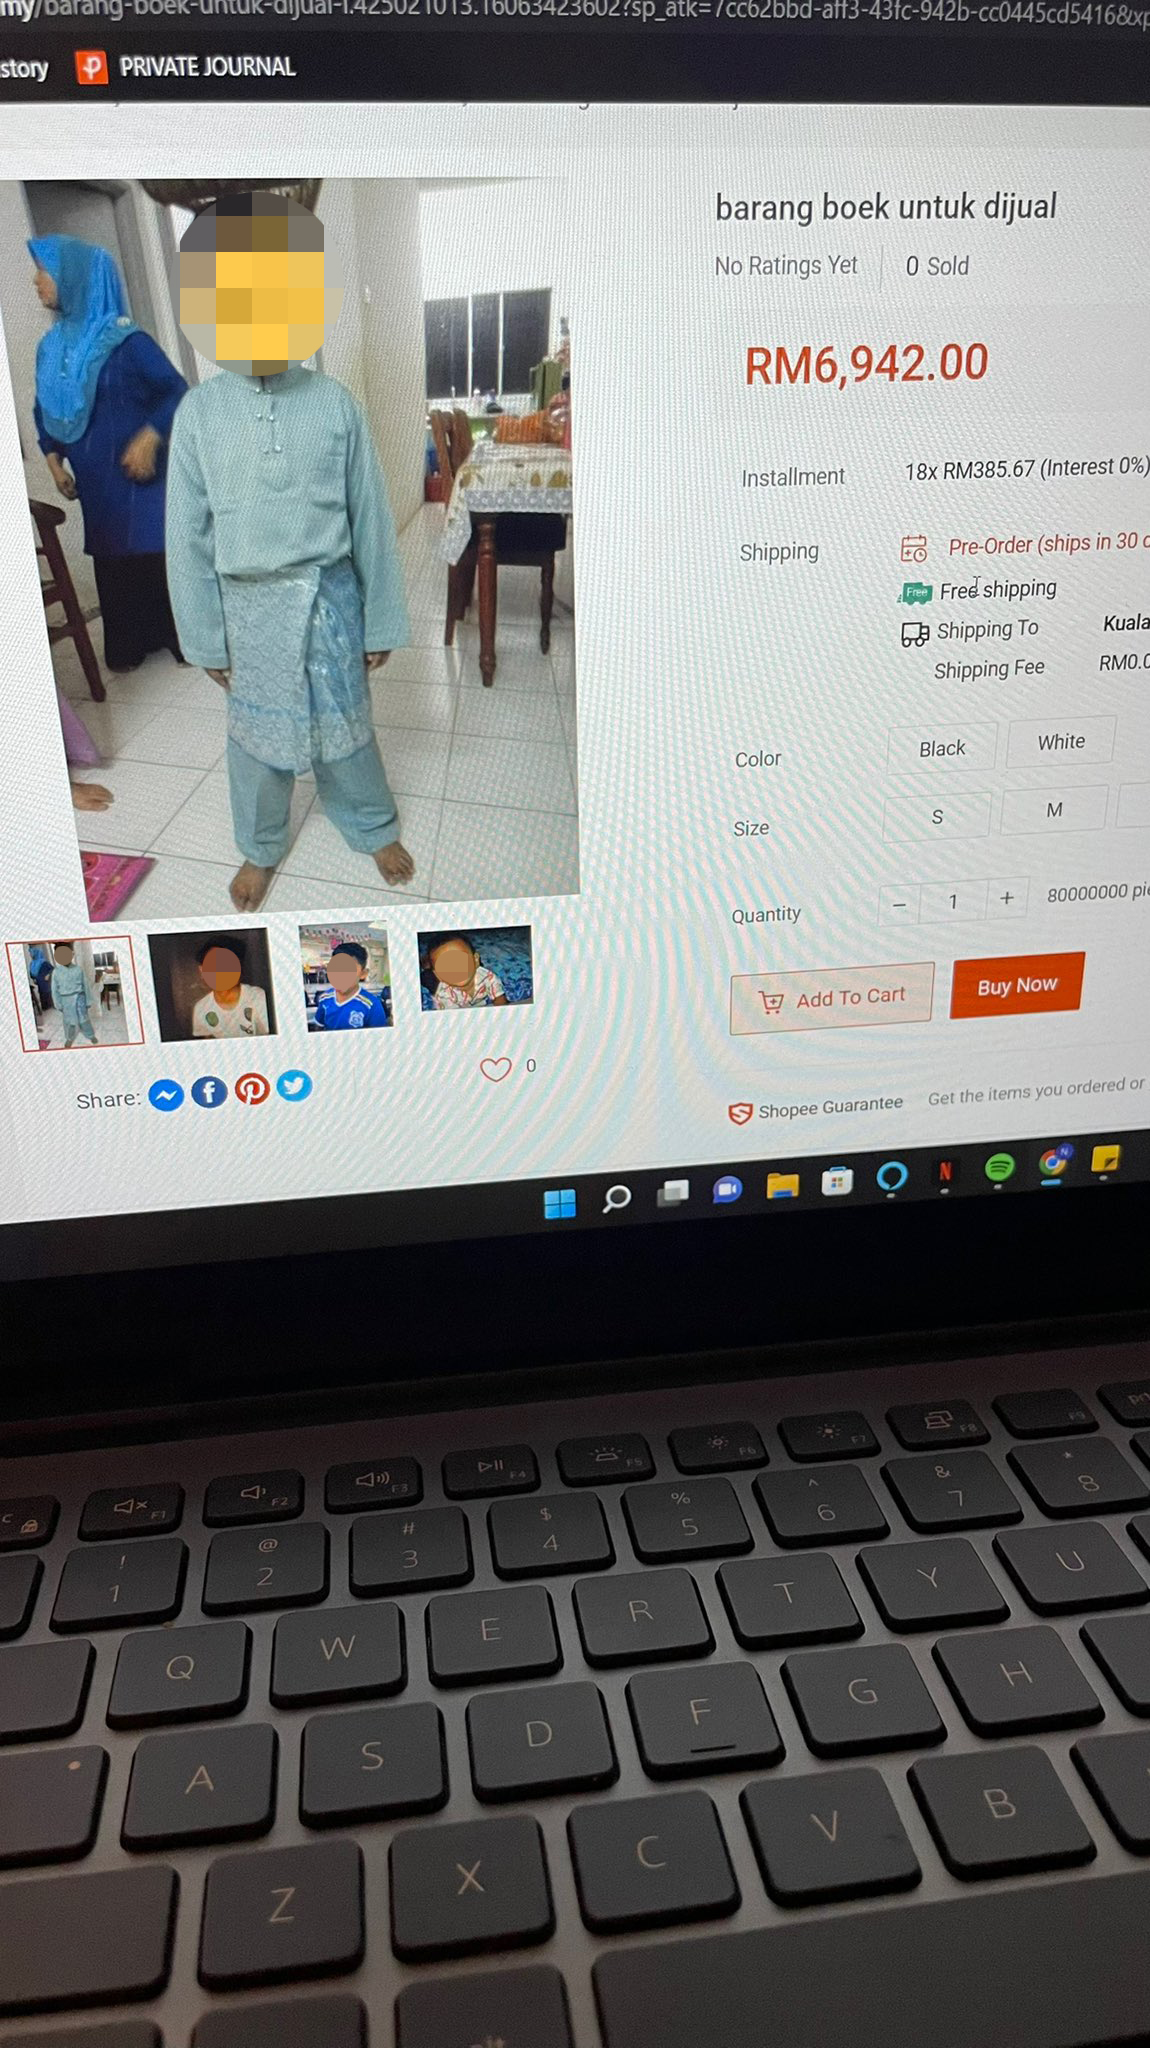 A listing on the popular e-commerce platform Shopee claims to be selling photos of underaged boys for 'sexual purposes'. Image credit: @softcrocodile